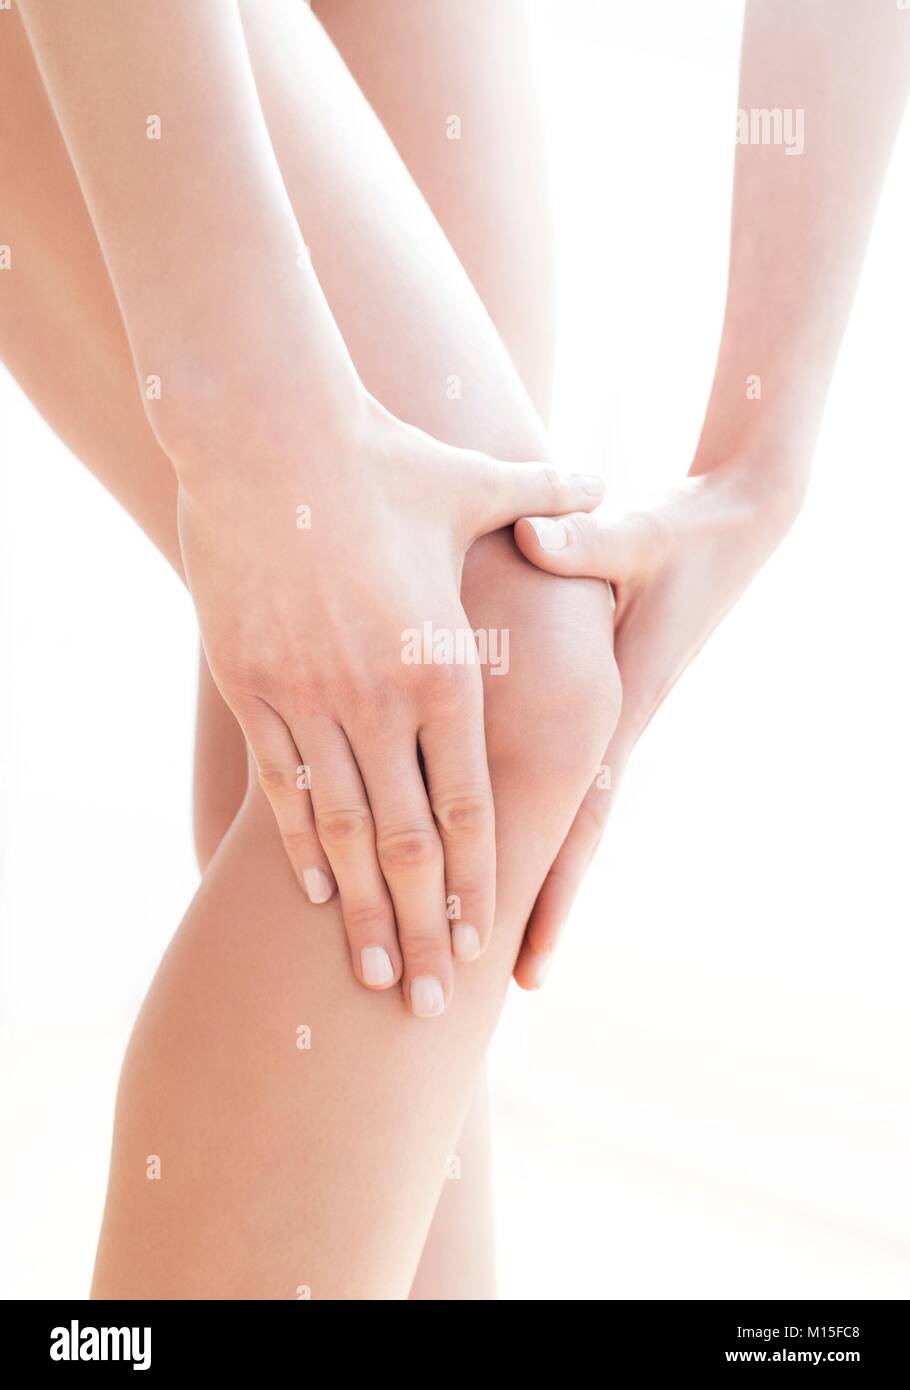 MODEL RELEASED. Young woman in pain rubbing her sore knee. Stock Photo